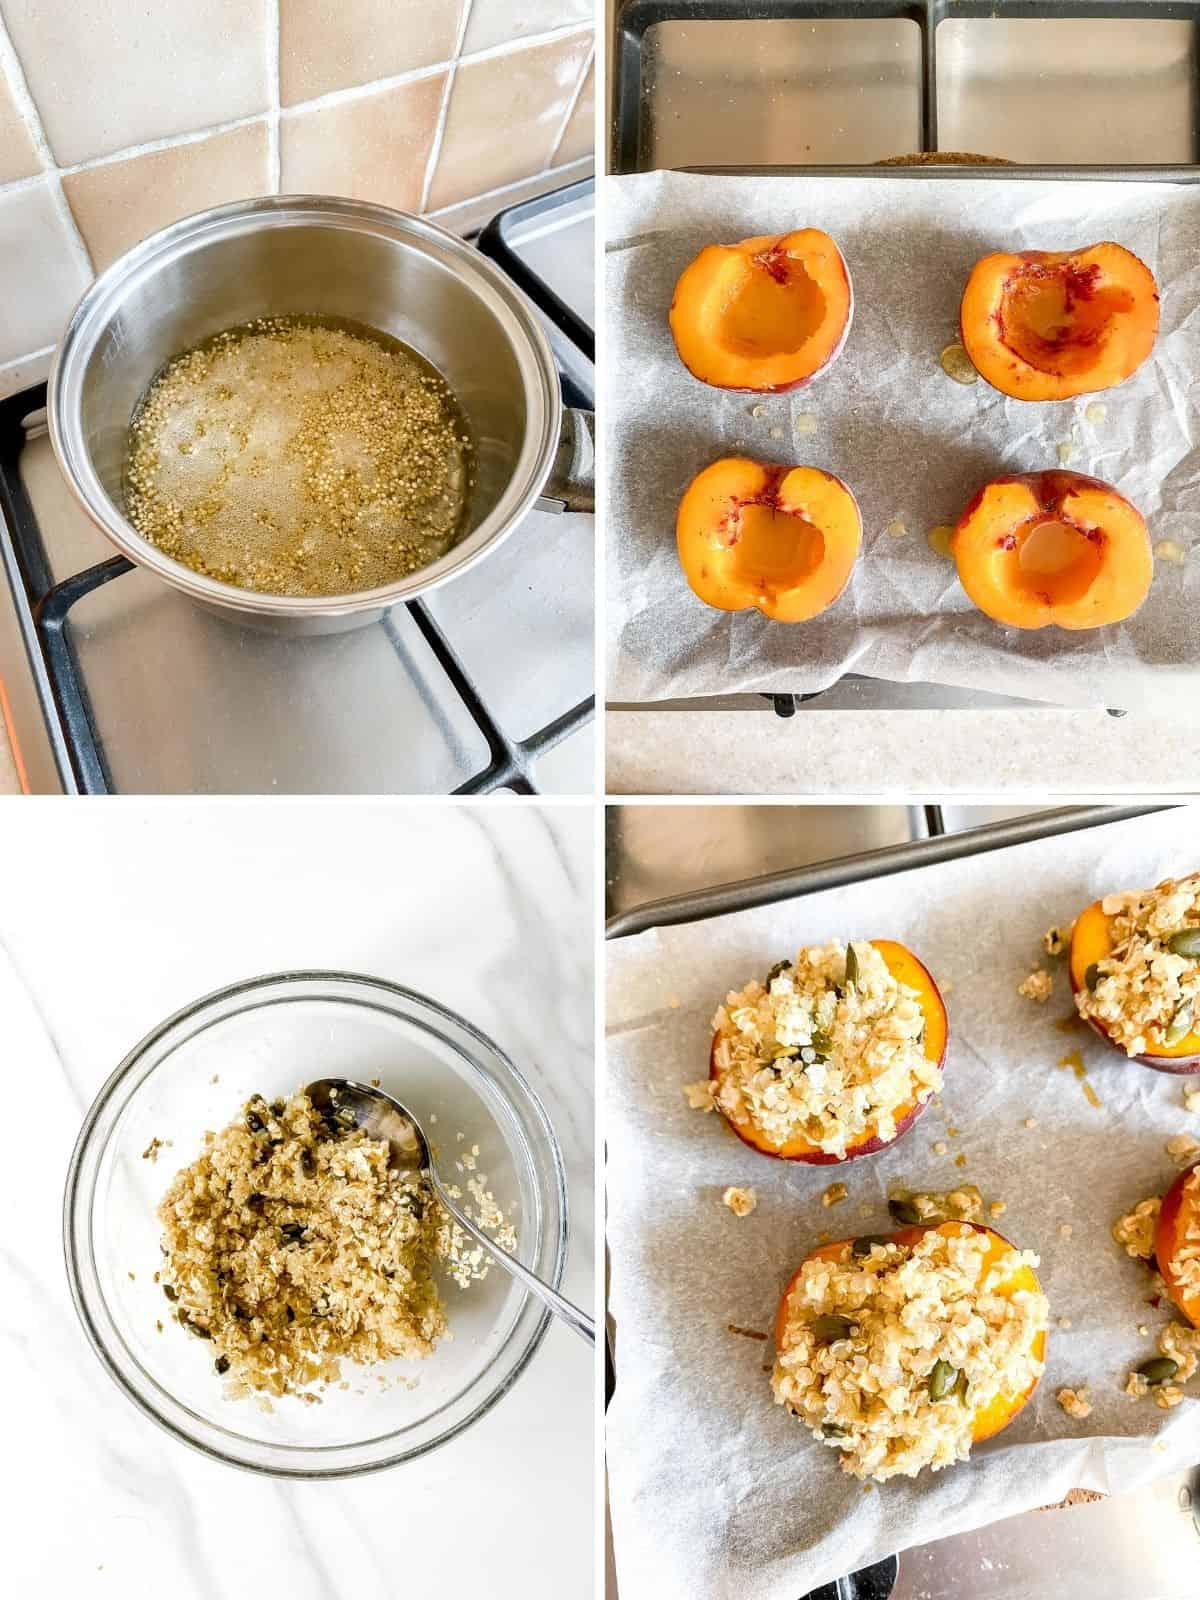 collage of making quinoa, peaches on a baking tray, oat topping and peaches stuffed with crumble topping on a baking tray.